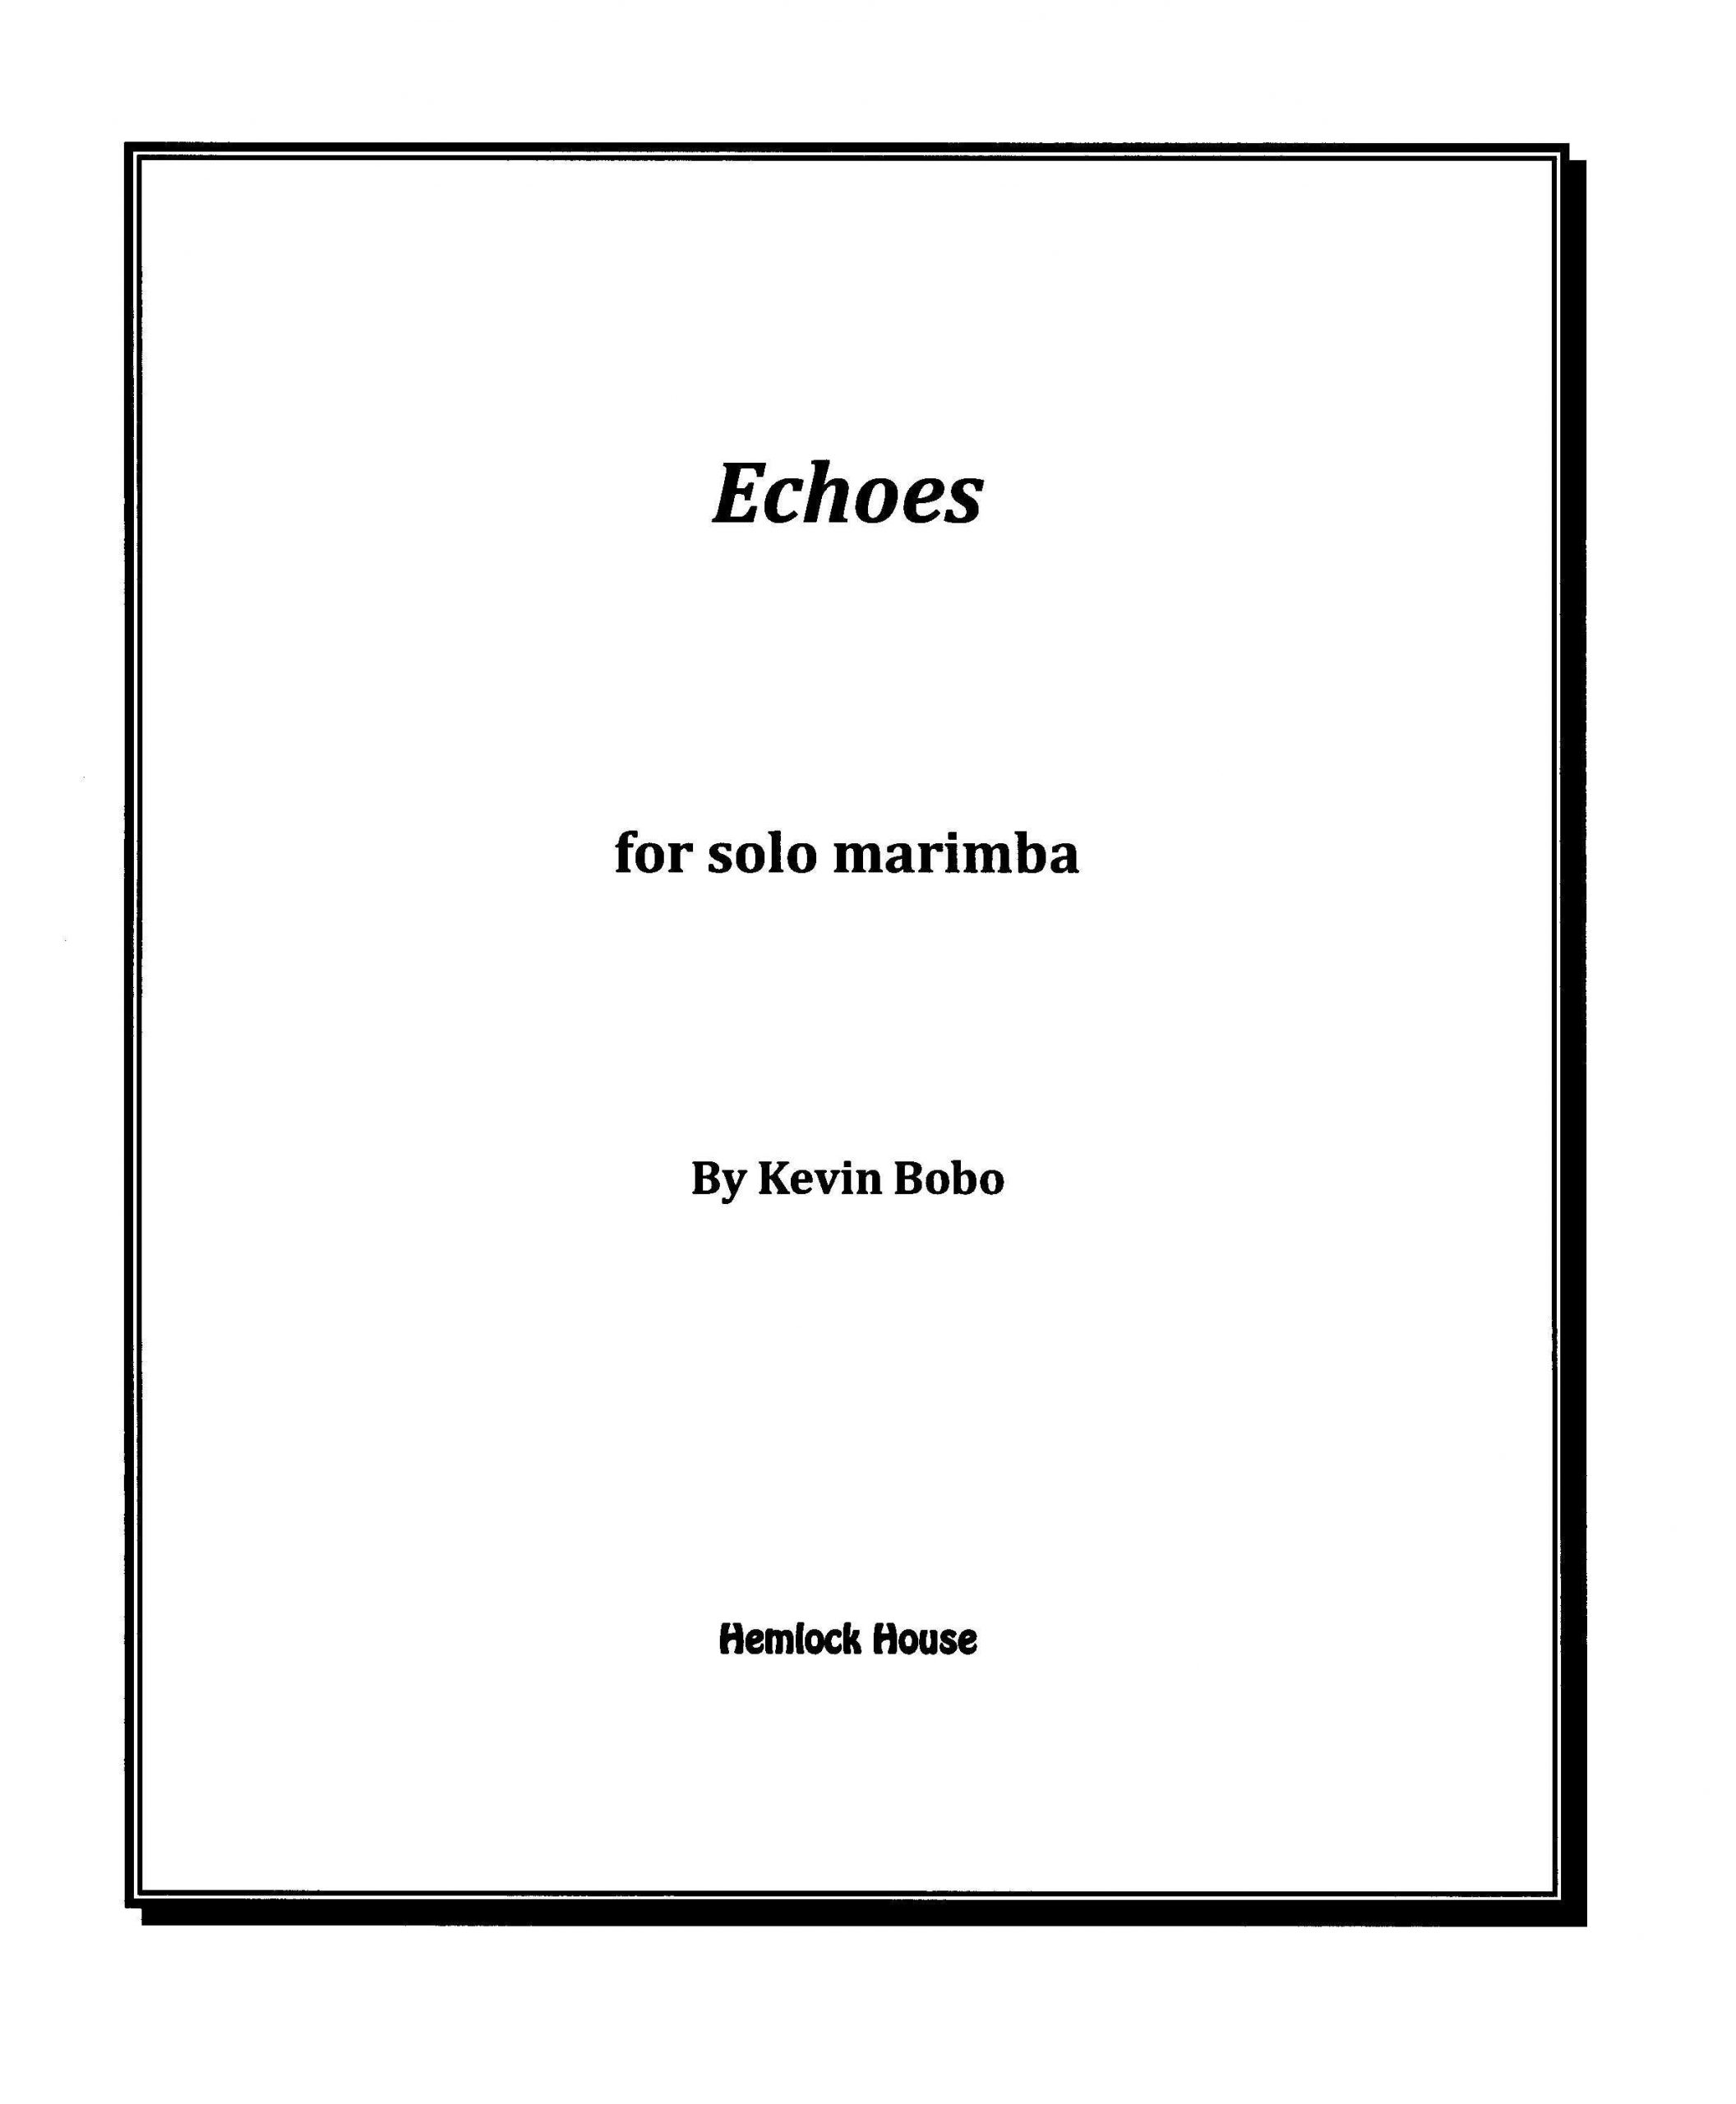 Echoes by Kevin Bobo